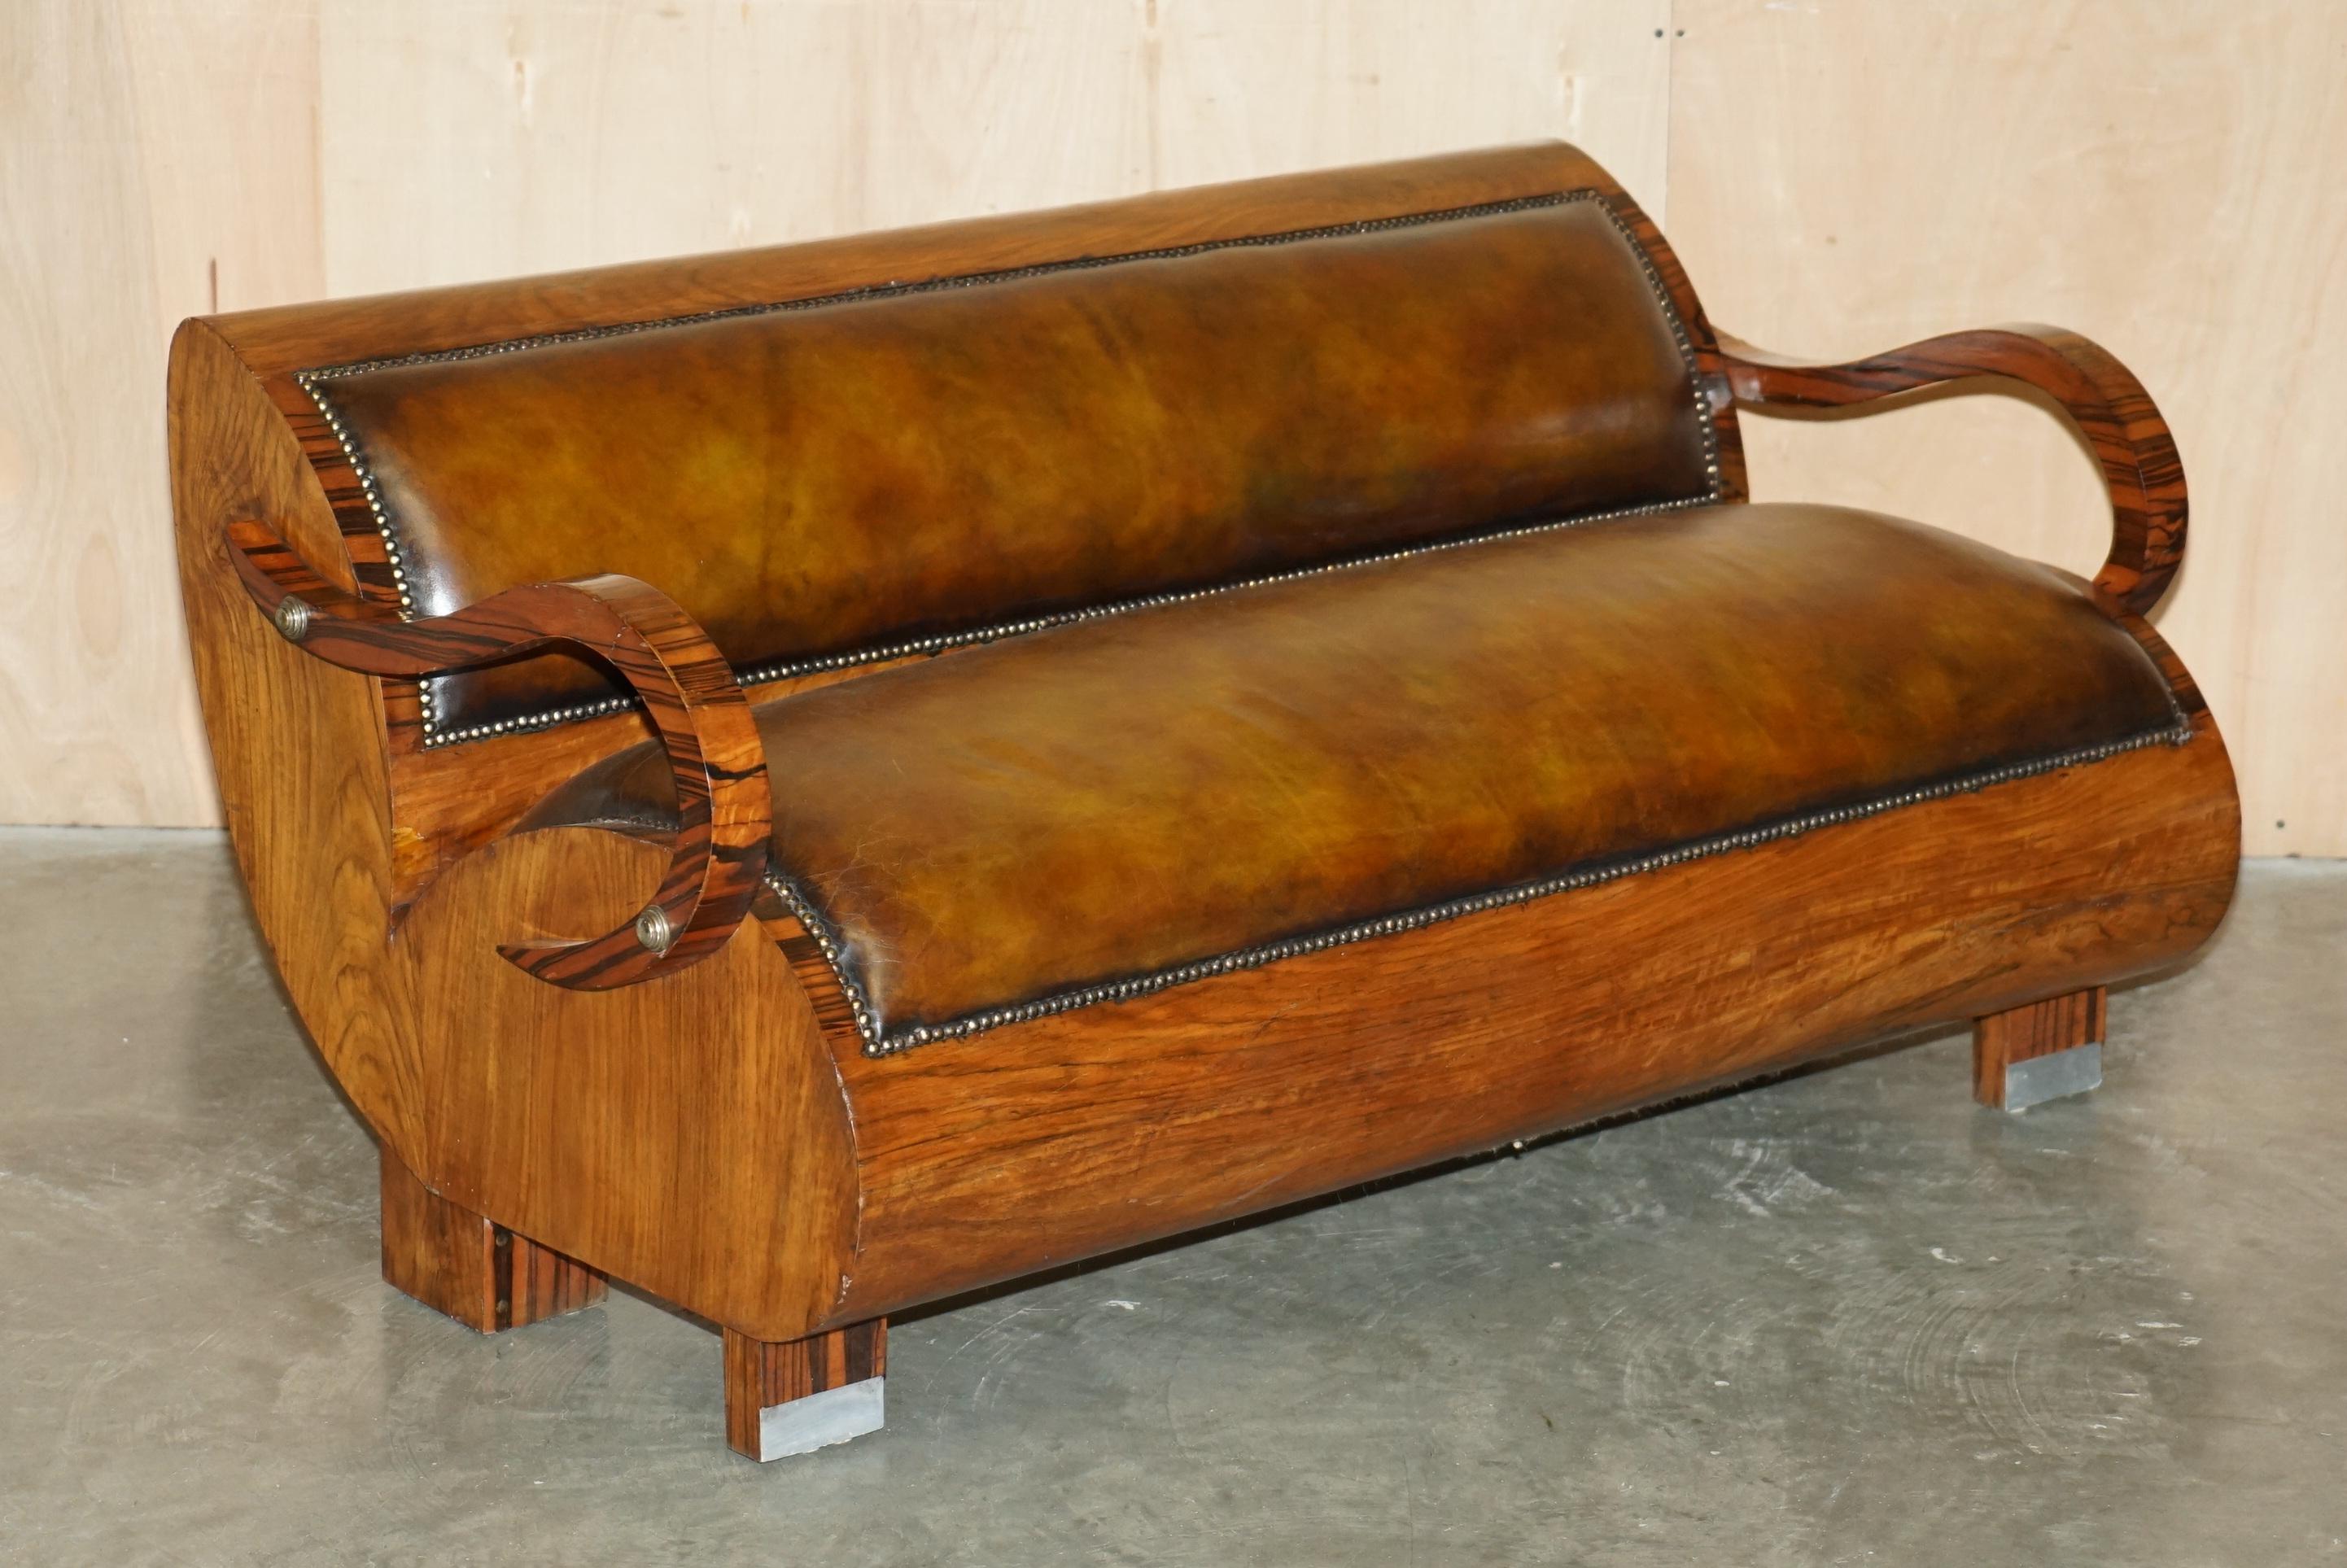 FULLY RESTORED ART DECO CIRCA 1920's ZEBRANO BROWN LEATHER SOFA ARMCHAIR SUITE For Sale 6